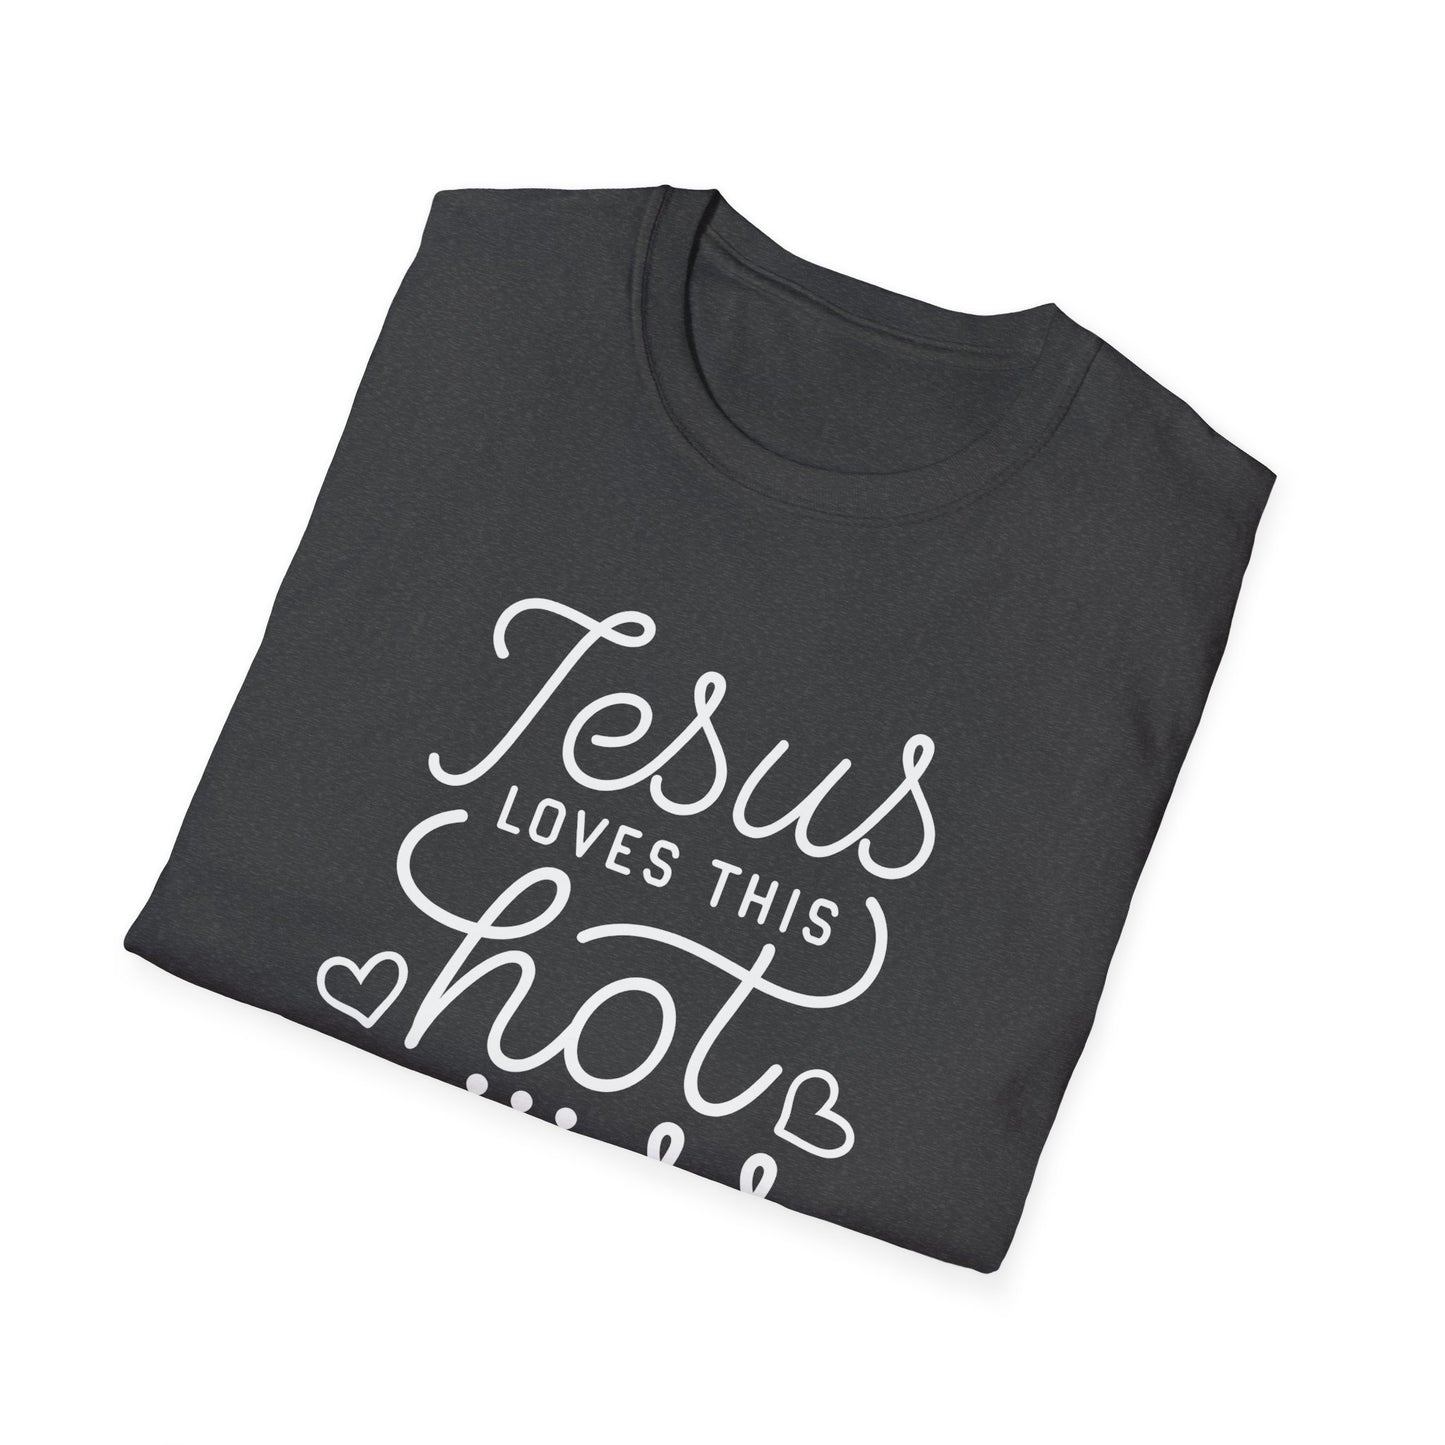 Jesus Loves This Hot Mess Unisex Softstyle T-Shirt